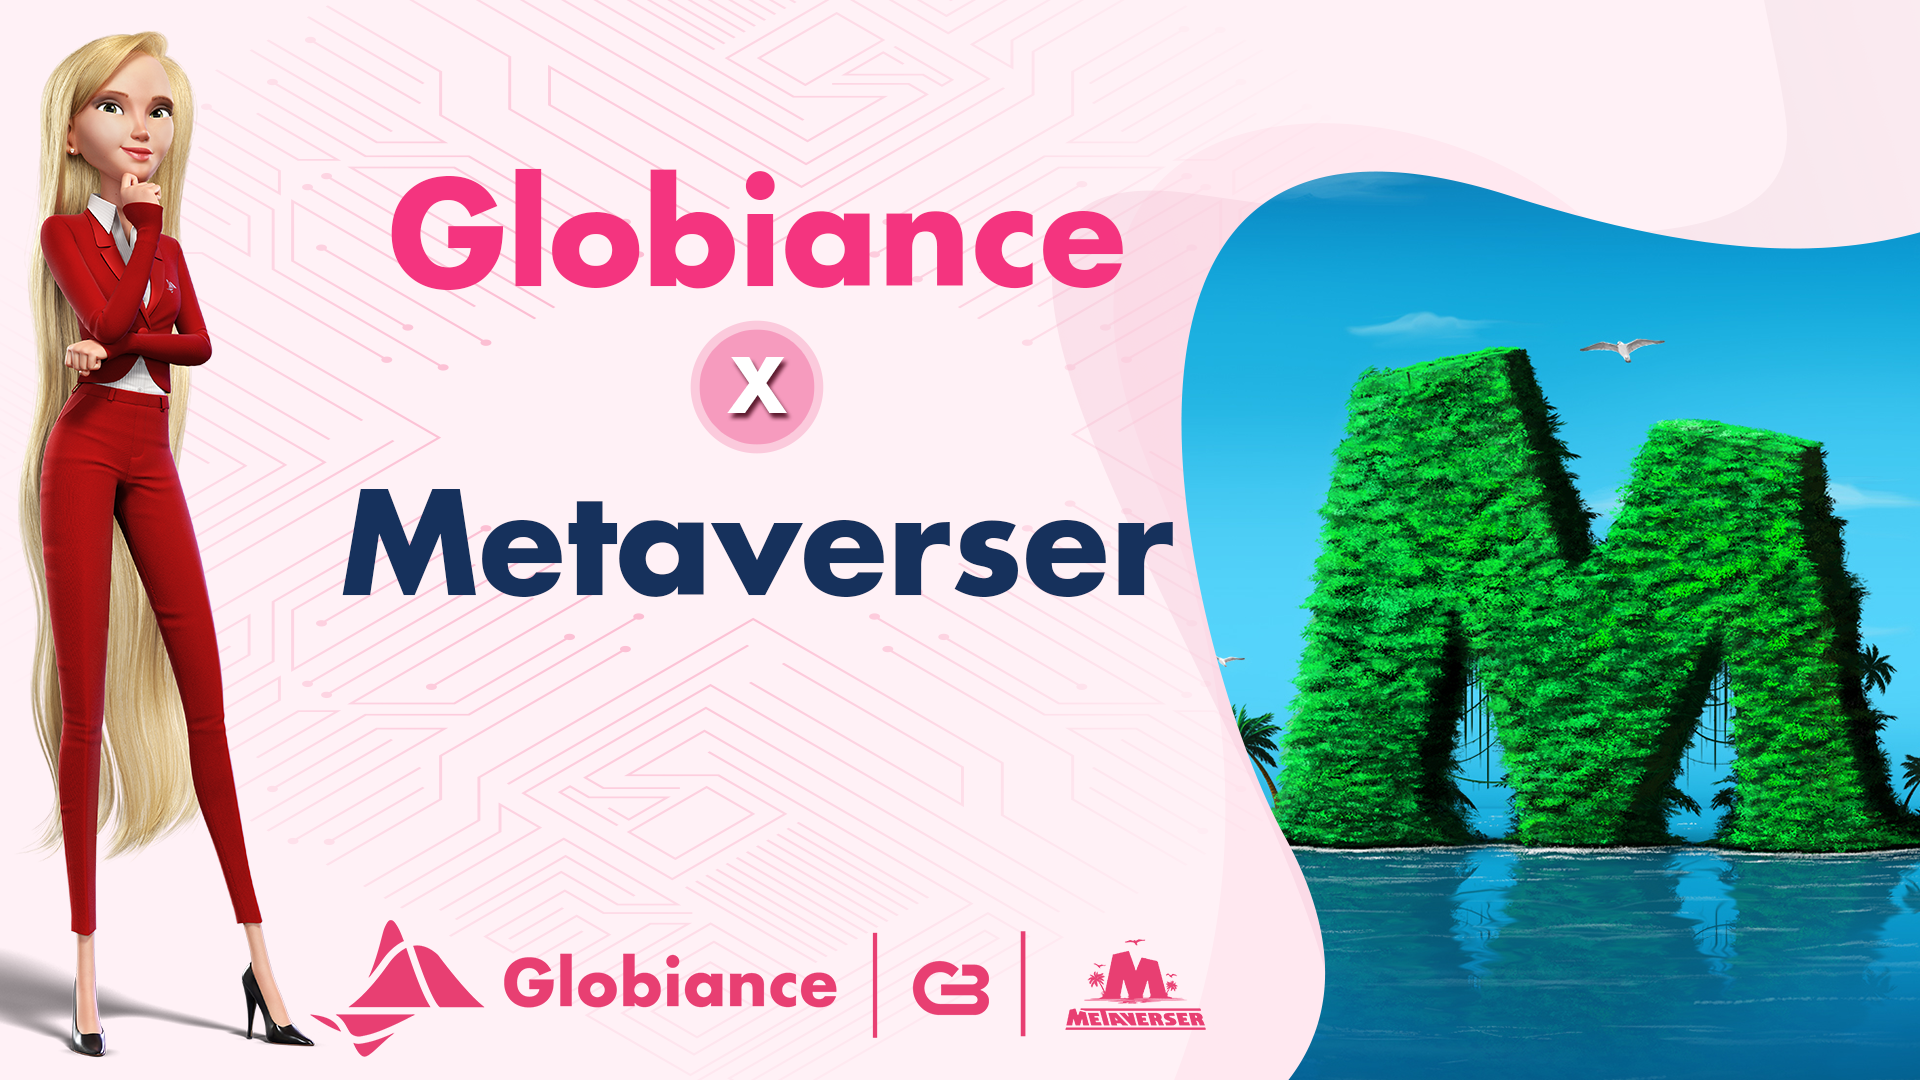 Globiance and Metaverser - The Revolutionary Fusion of Global Finance with the Metaverse | Bitcoinist.com - Bitcoinist